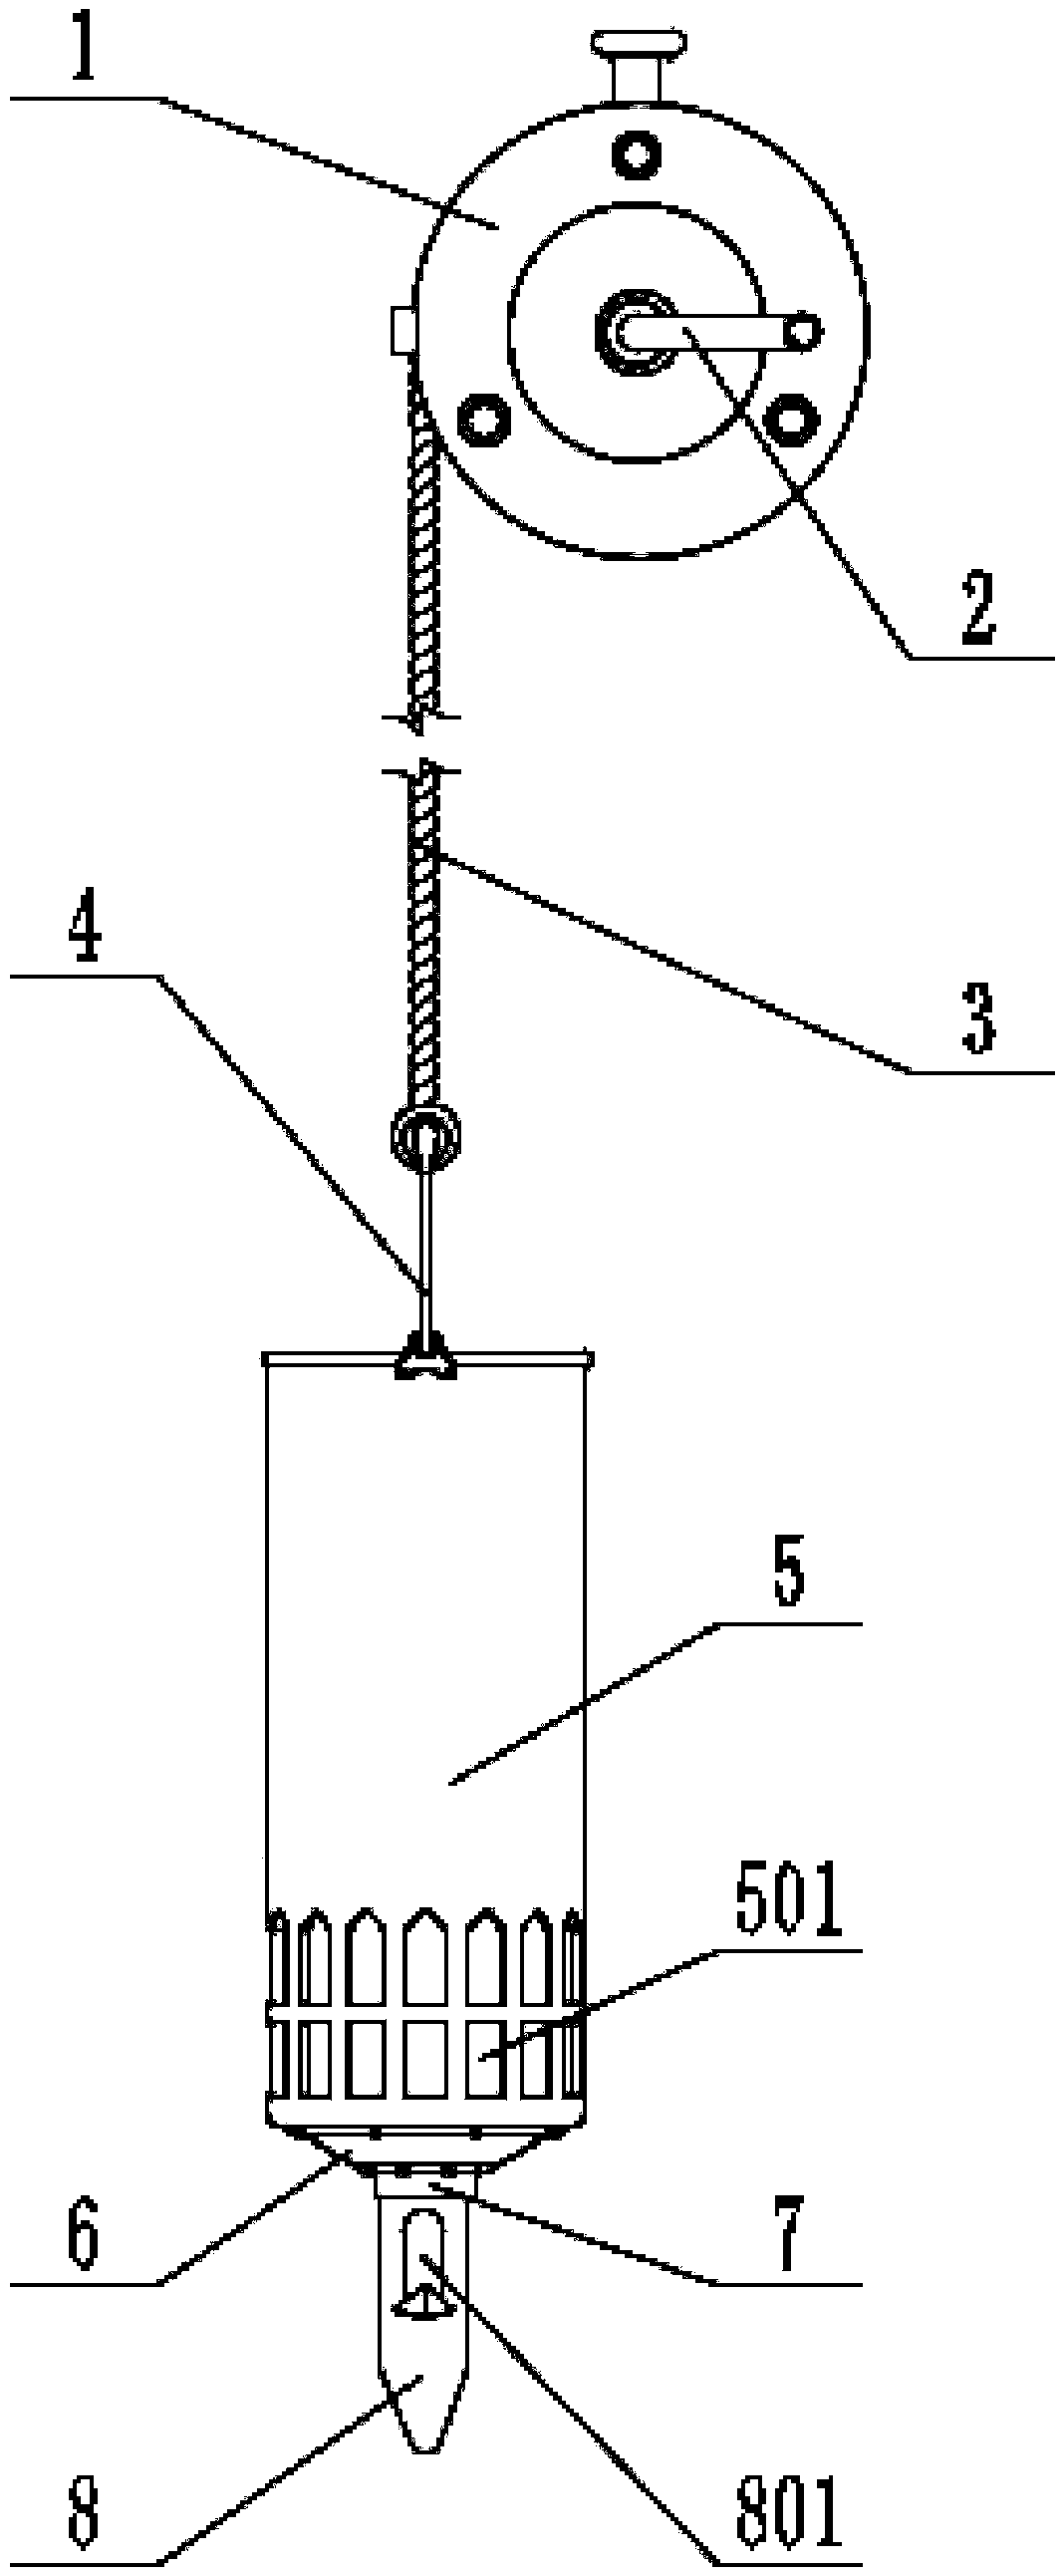 Sampling device for detecting water resources